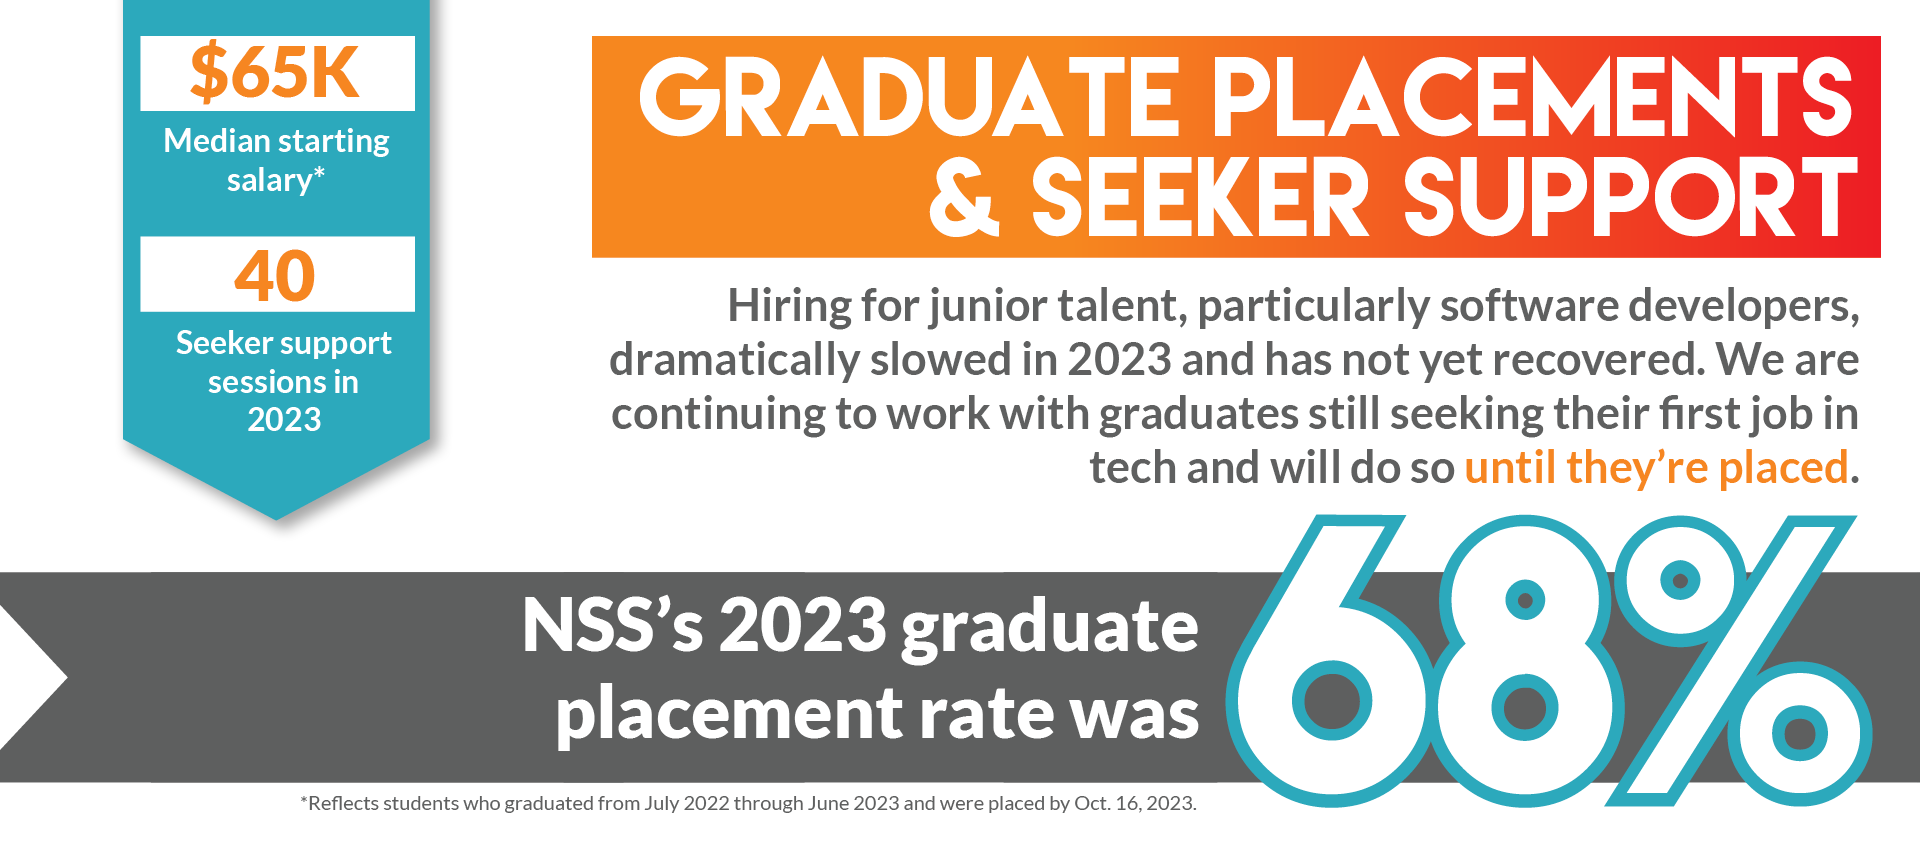 NSS_Community_Impact_Report_2023_Placement-and-Seeker-Support